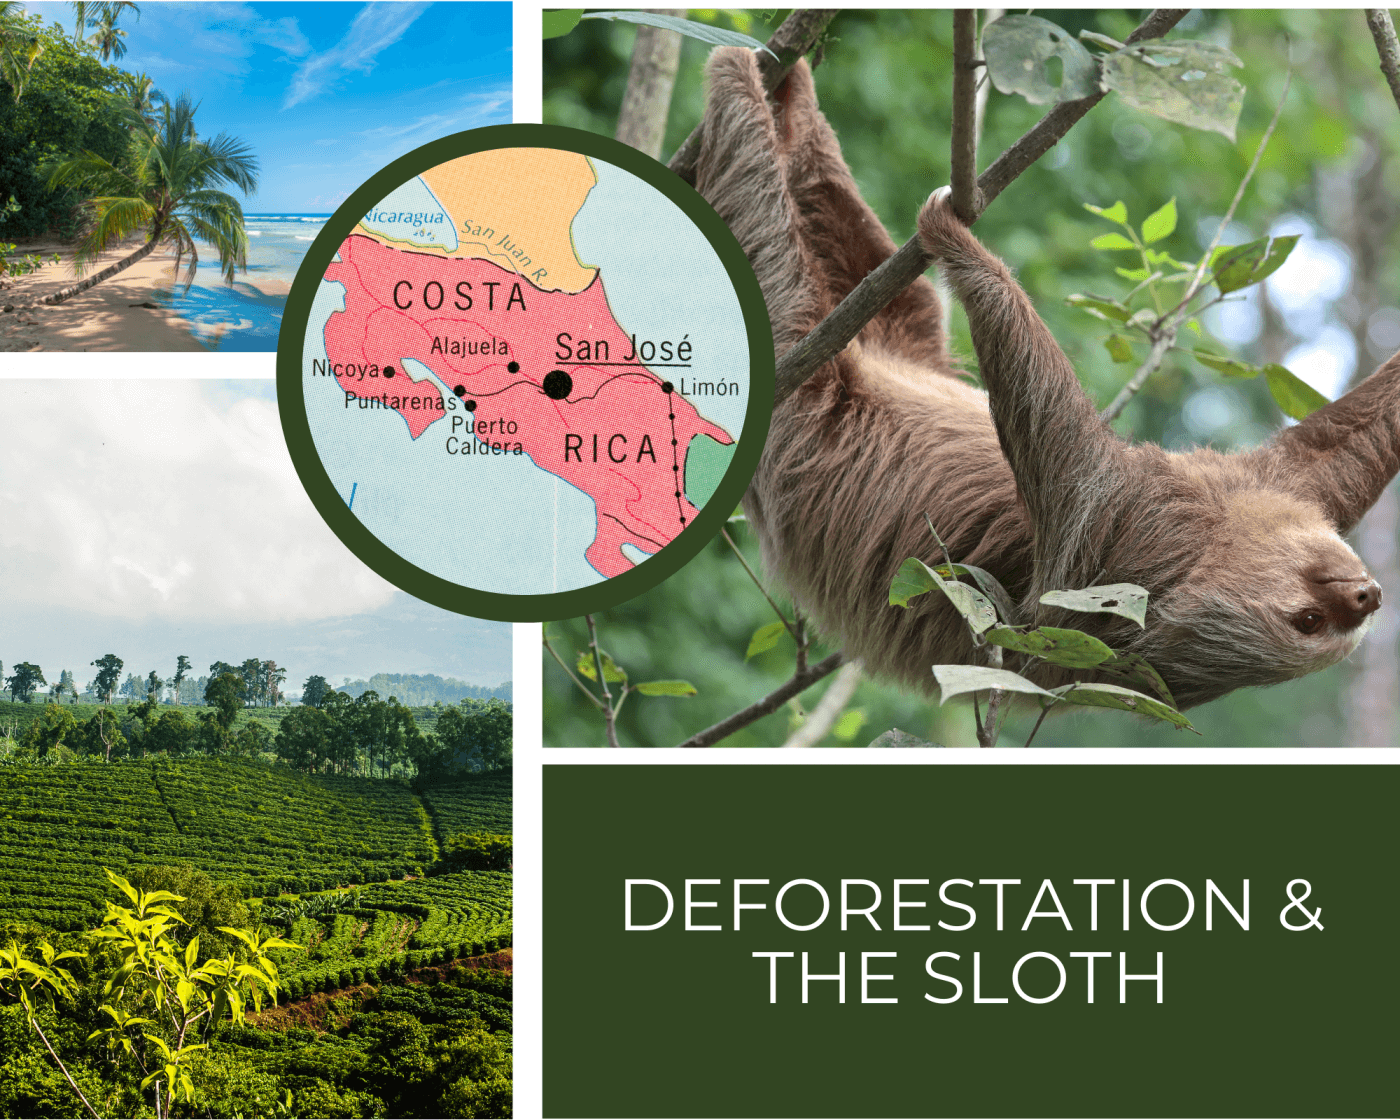 In the top left is a beach, and in the bottom left is a coffee farm. In the top right is a sloth, and in the bottom right it says deforestation & the sloth. In the center is Costa Rica on a map.